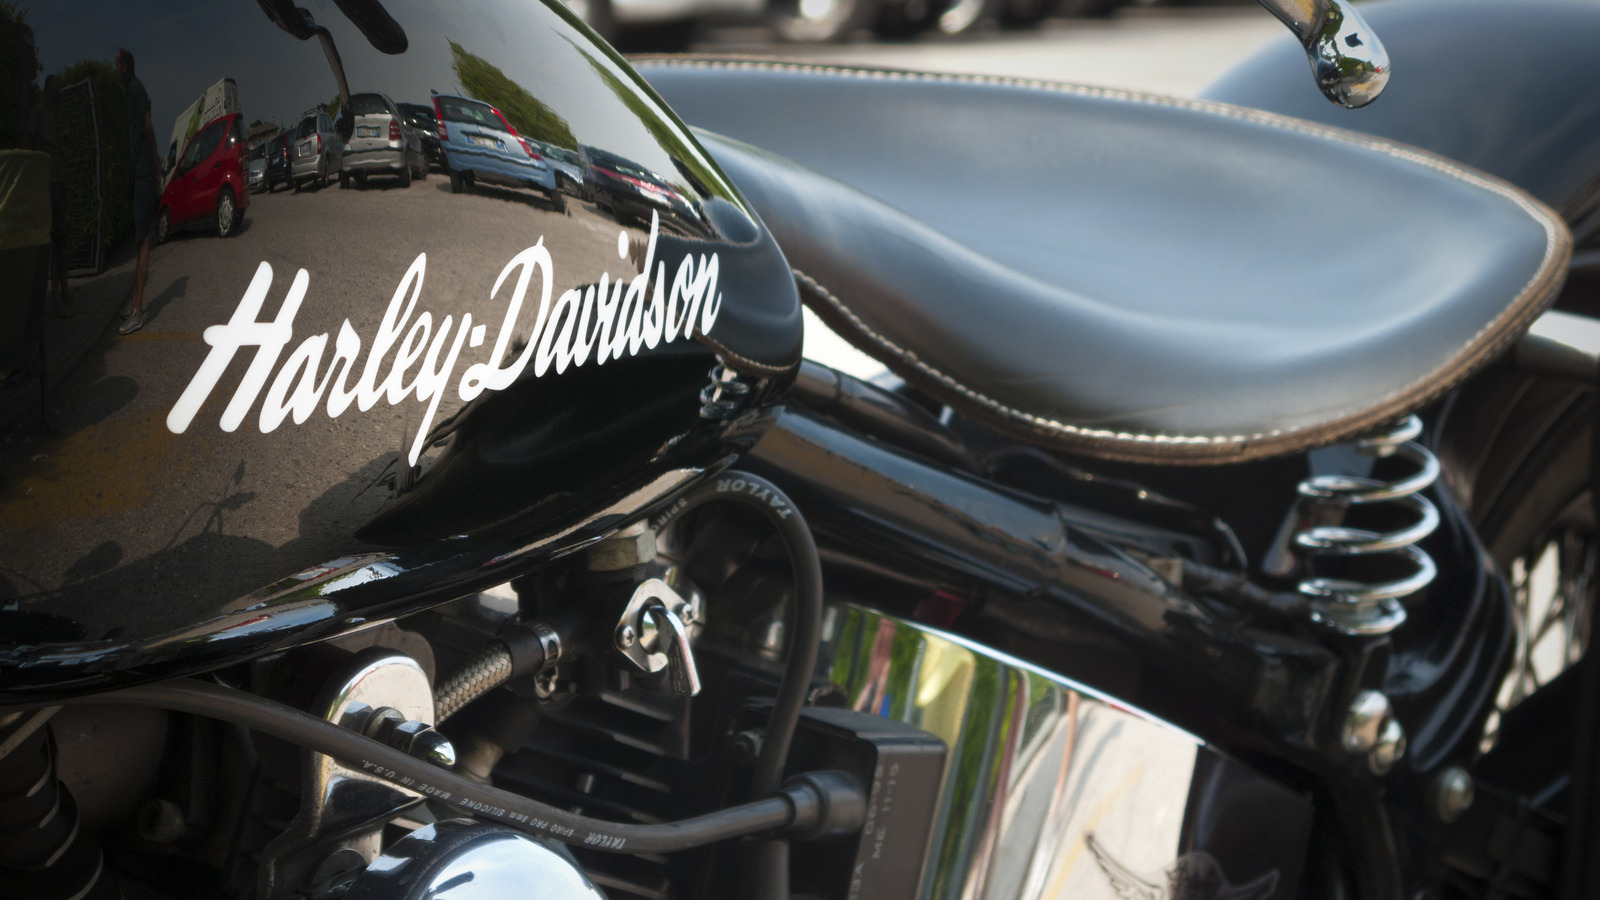 5 Things You Probably Didn't Realize Harley-Davidson Makes